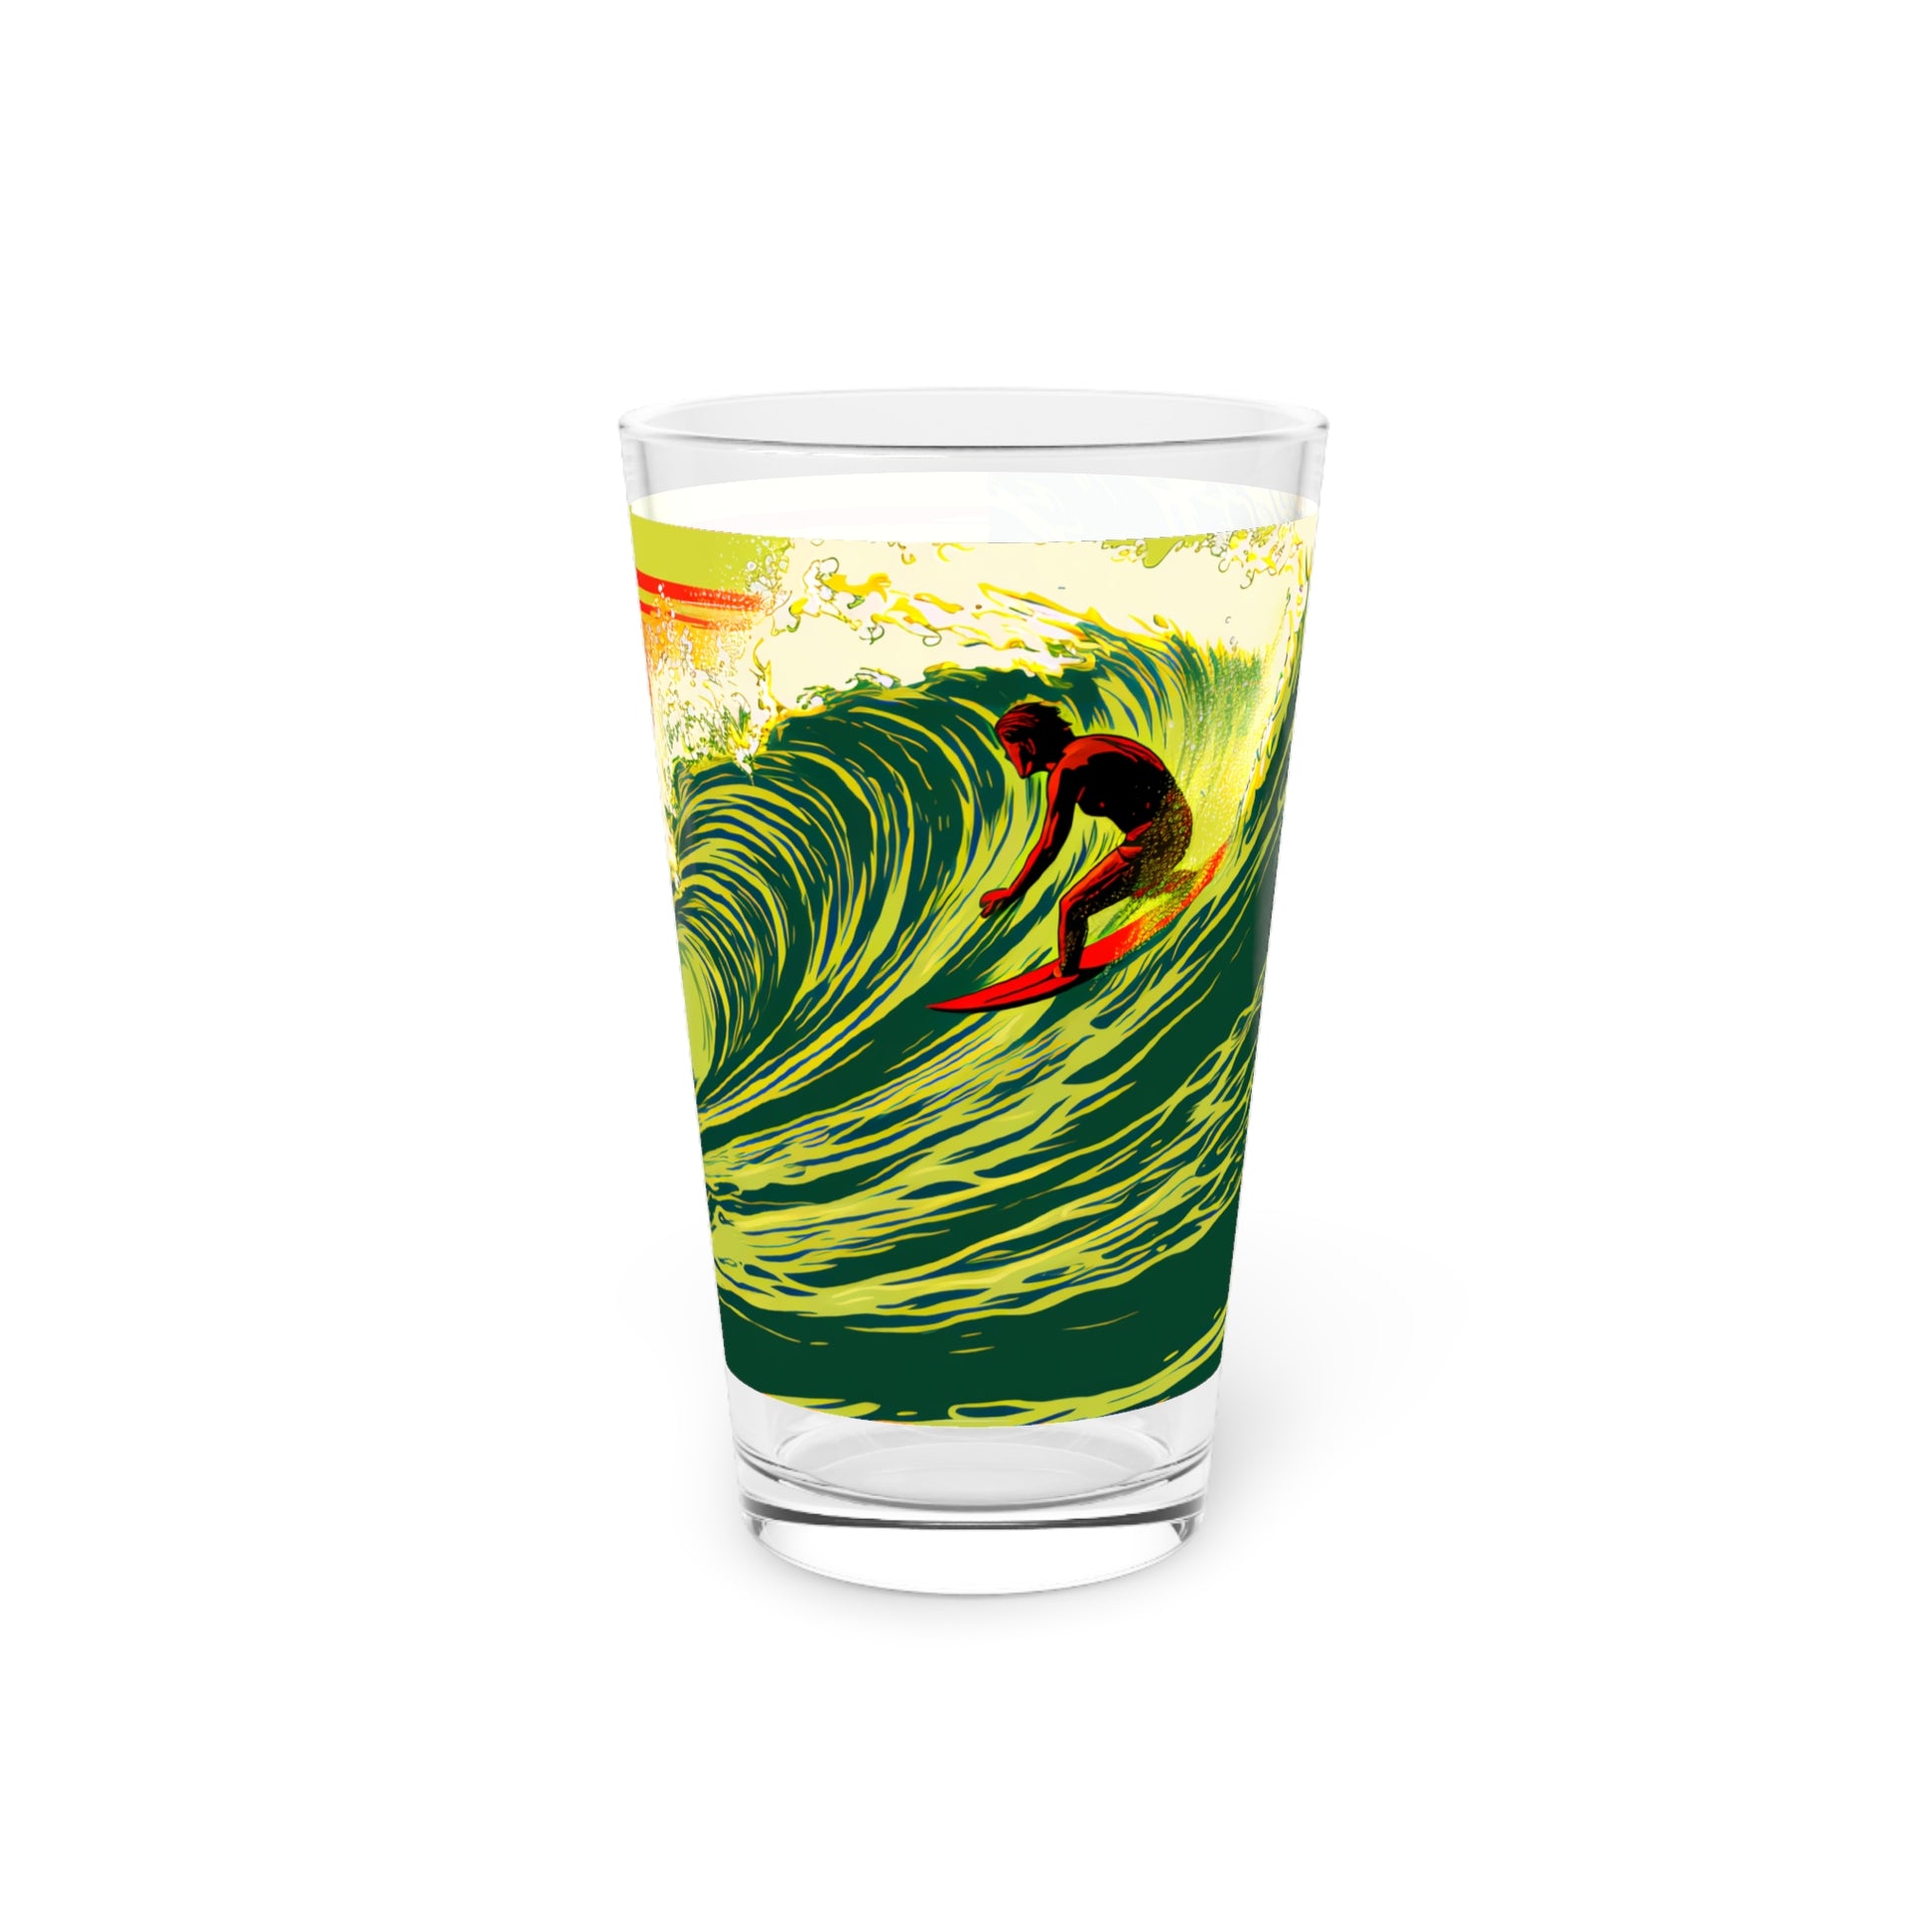 Surfing Huge Wave Unisex Softstyle T-Shirt - Waves Design #038: Ride the waves in style with our iconic surfing tee. Perfect for ocean enthusiasts.Surfing in Hawaii Wave Art Pint Glass 16oz - Waves Design #040: Experience the spirit of Hawaii's waves with our vibrant and stylish pint glass.